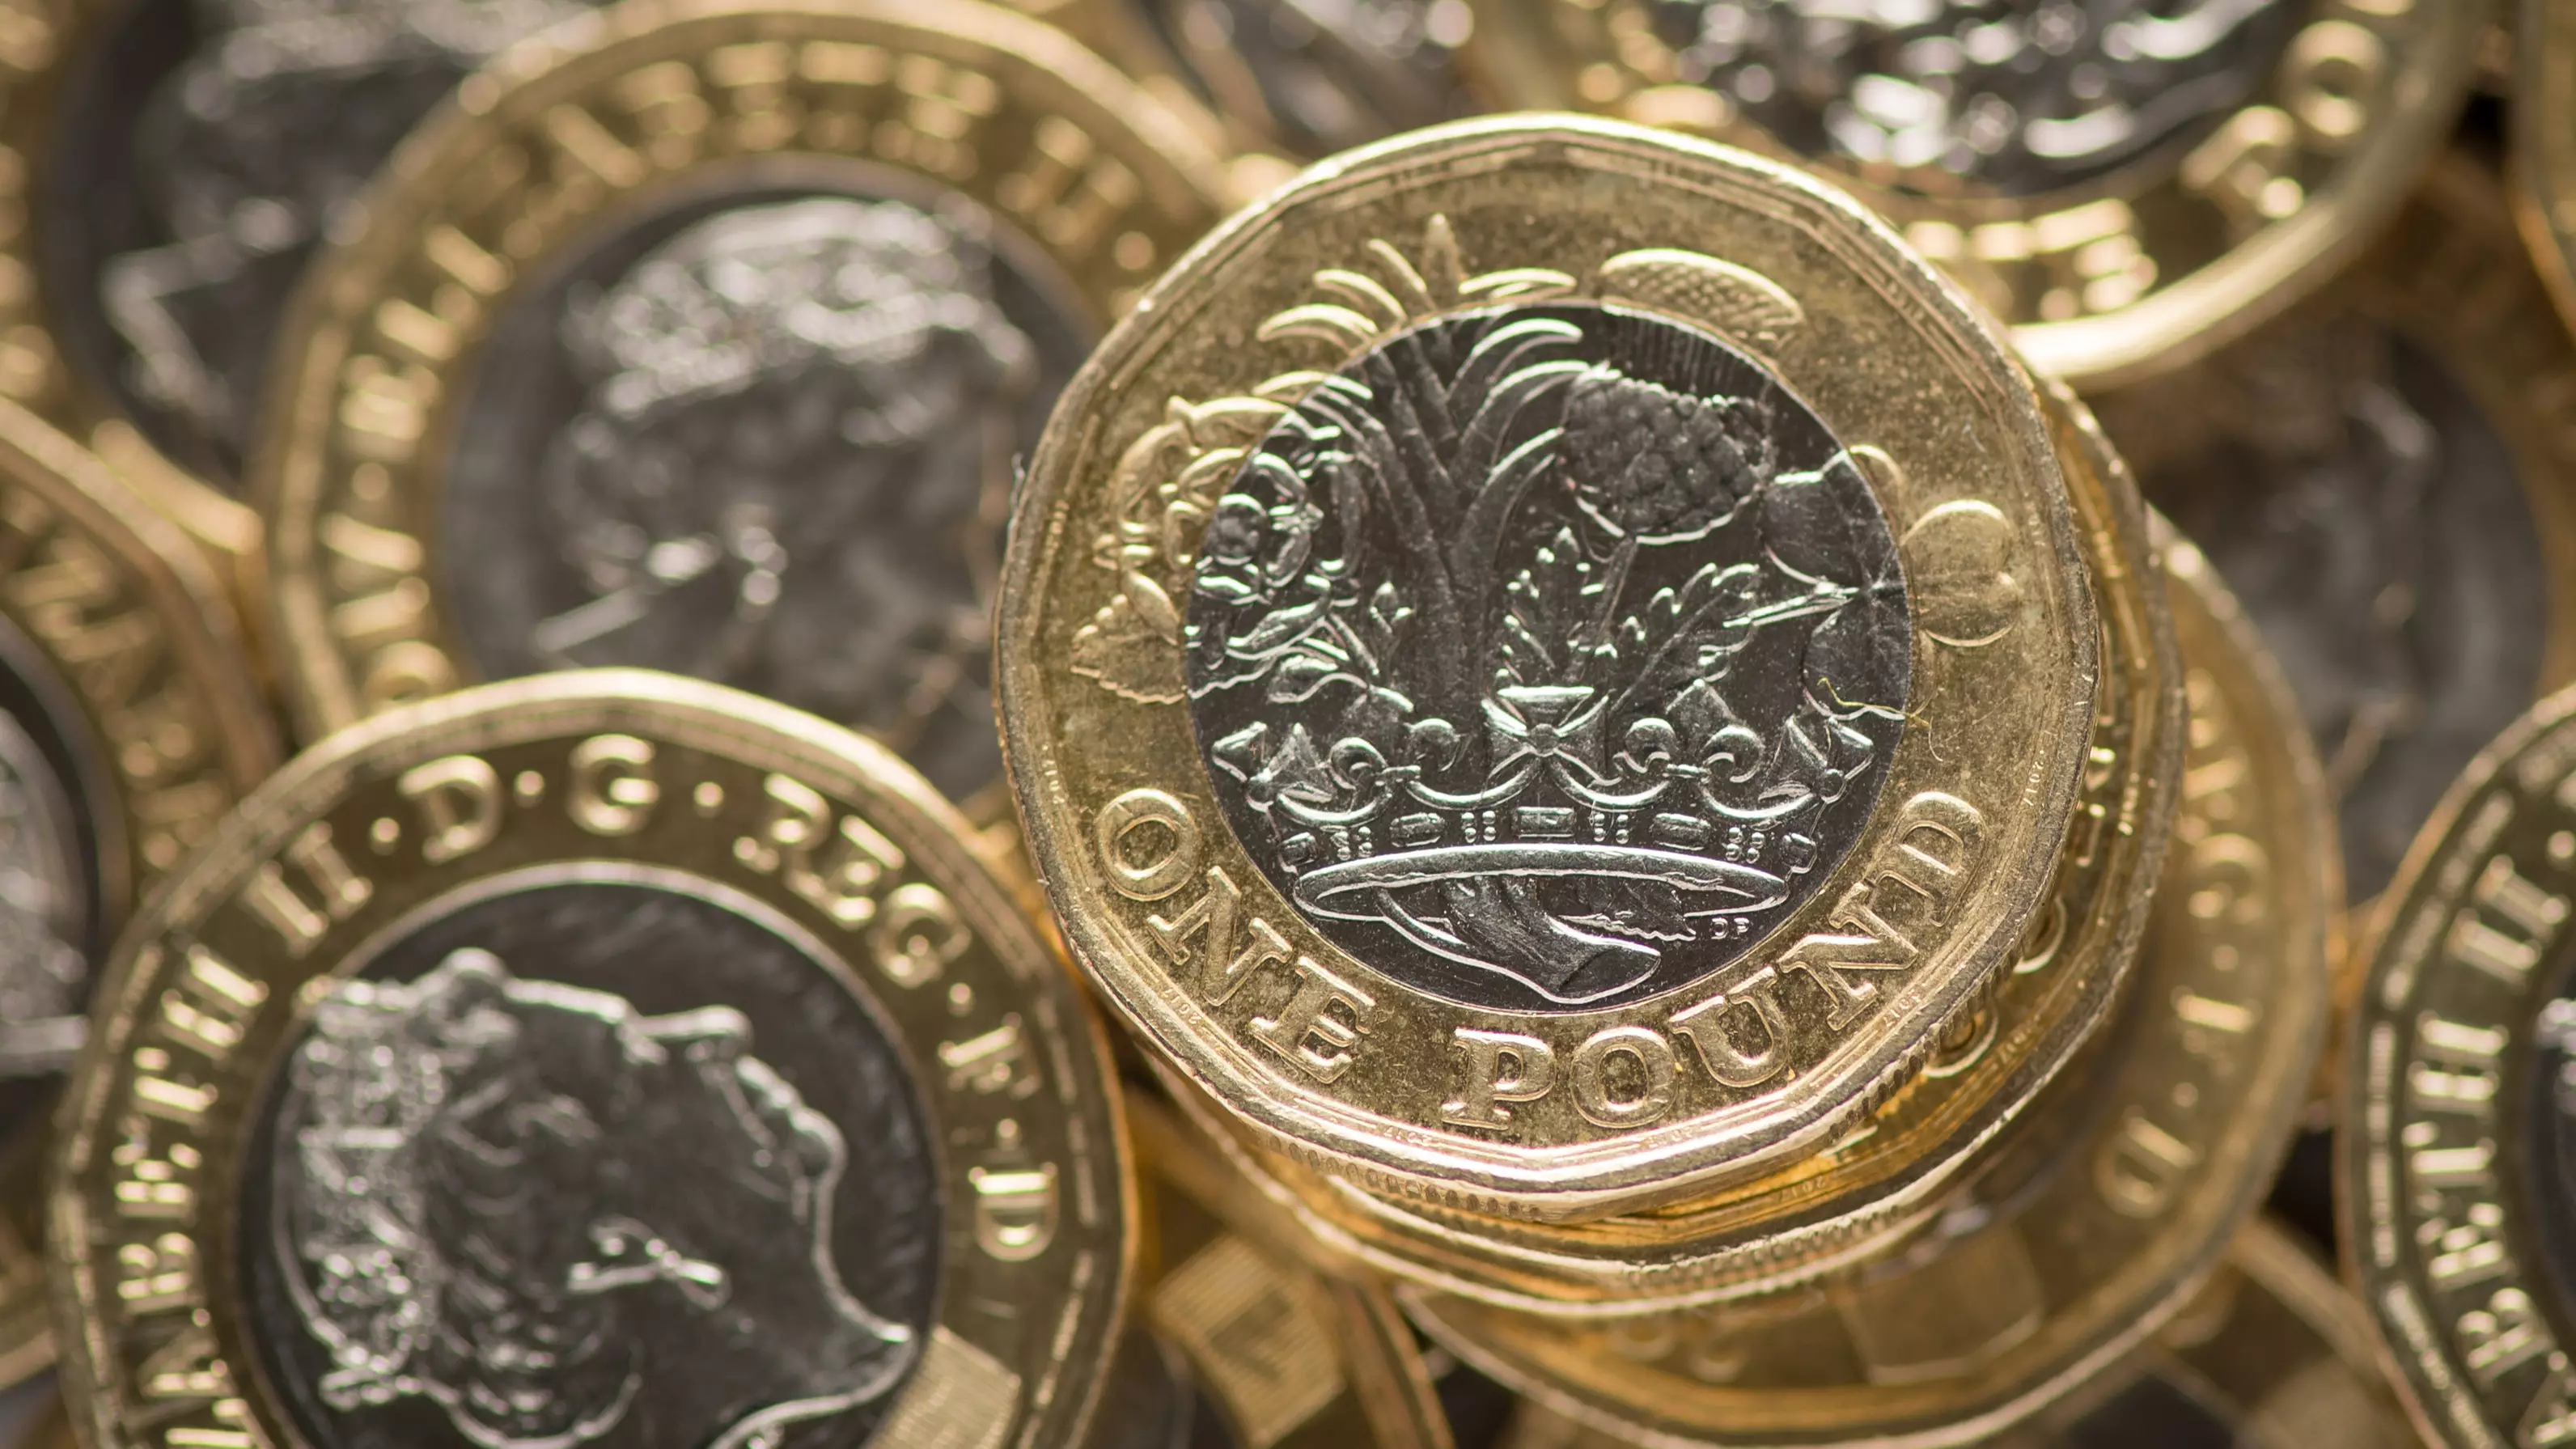 A New Rare £1 Coin With Minting ‘Error’ Has Been Discovered & It's Selling For a Fortune on eBay